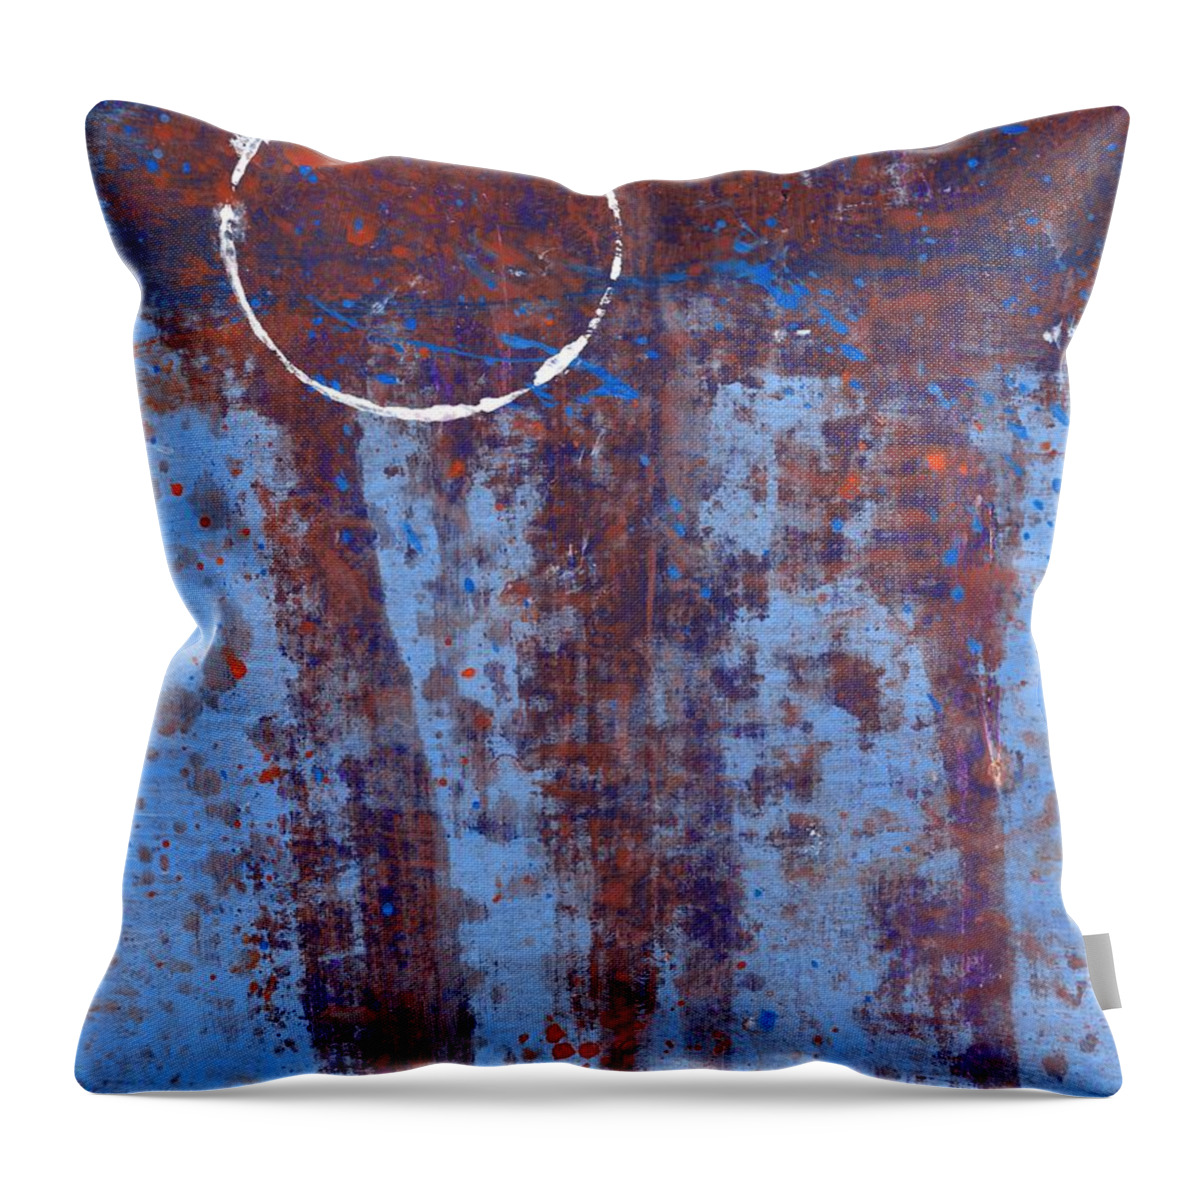 Day 82 Throw Pillow featuring the painting Dream Weaver by Bill Tomsa